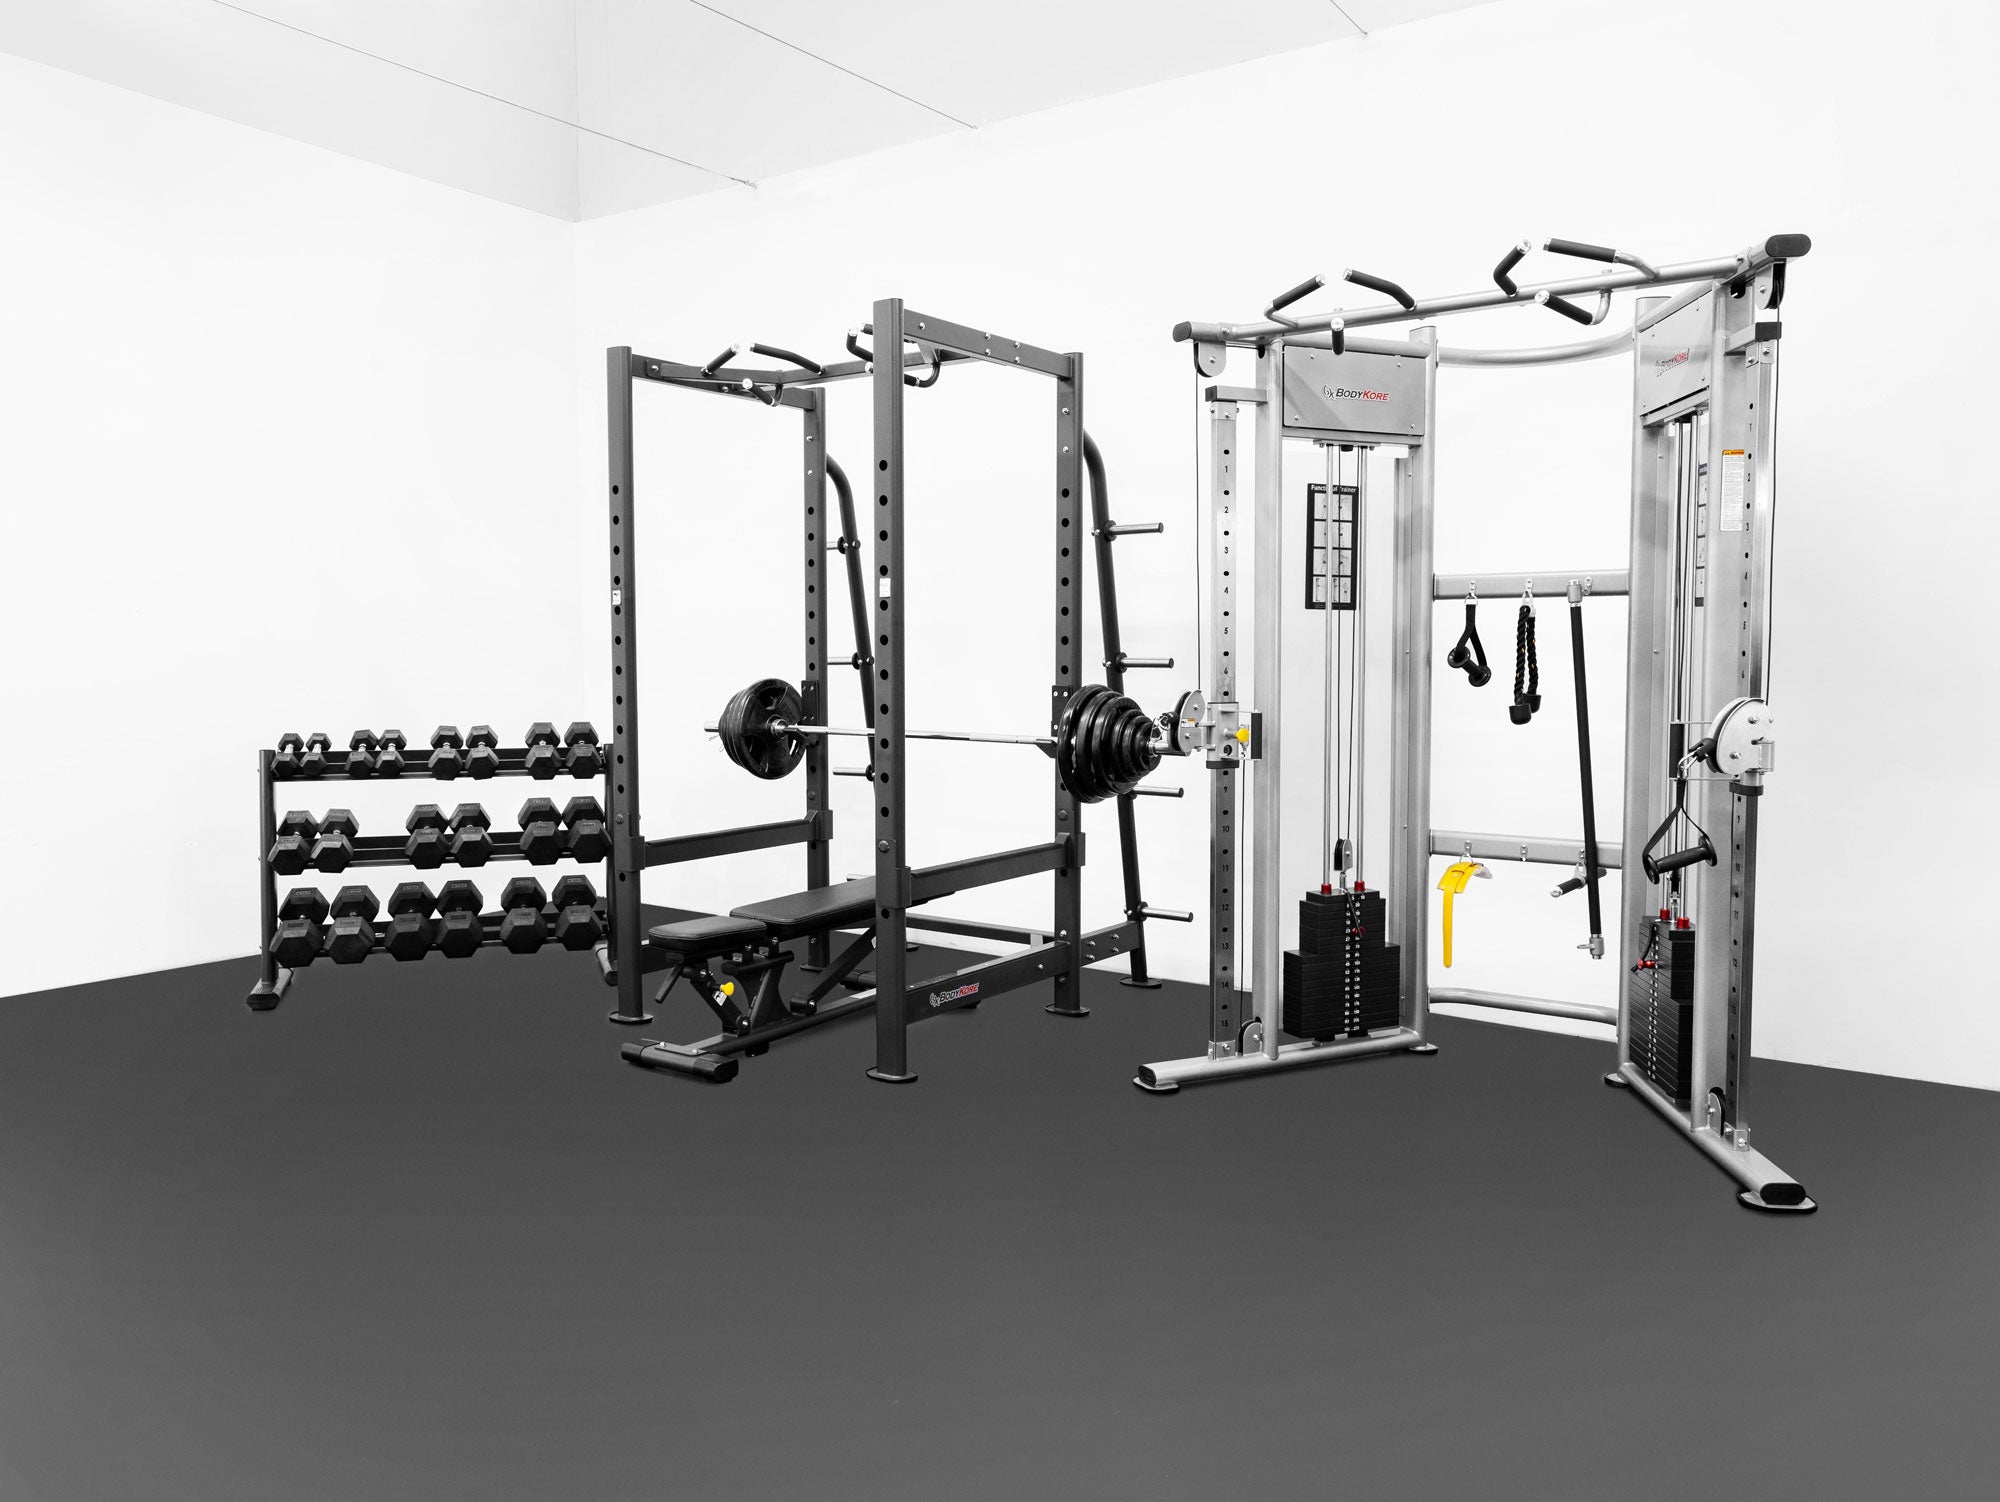 Complete Home Garage Gym Equipment Packages